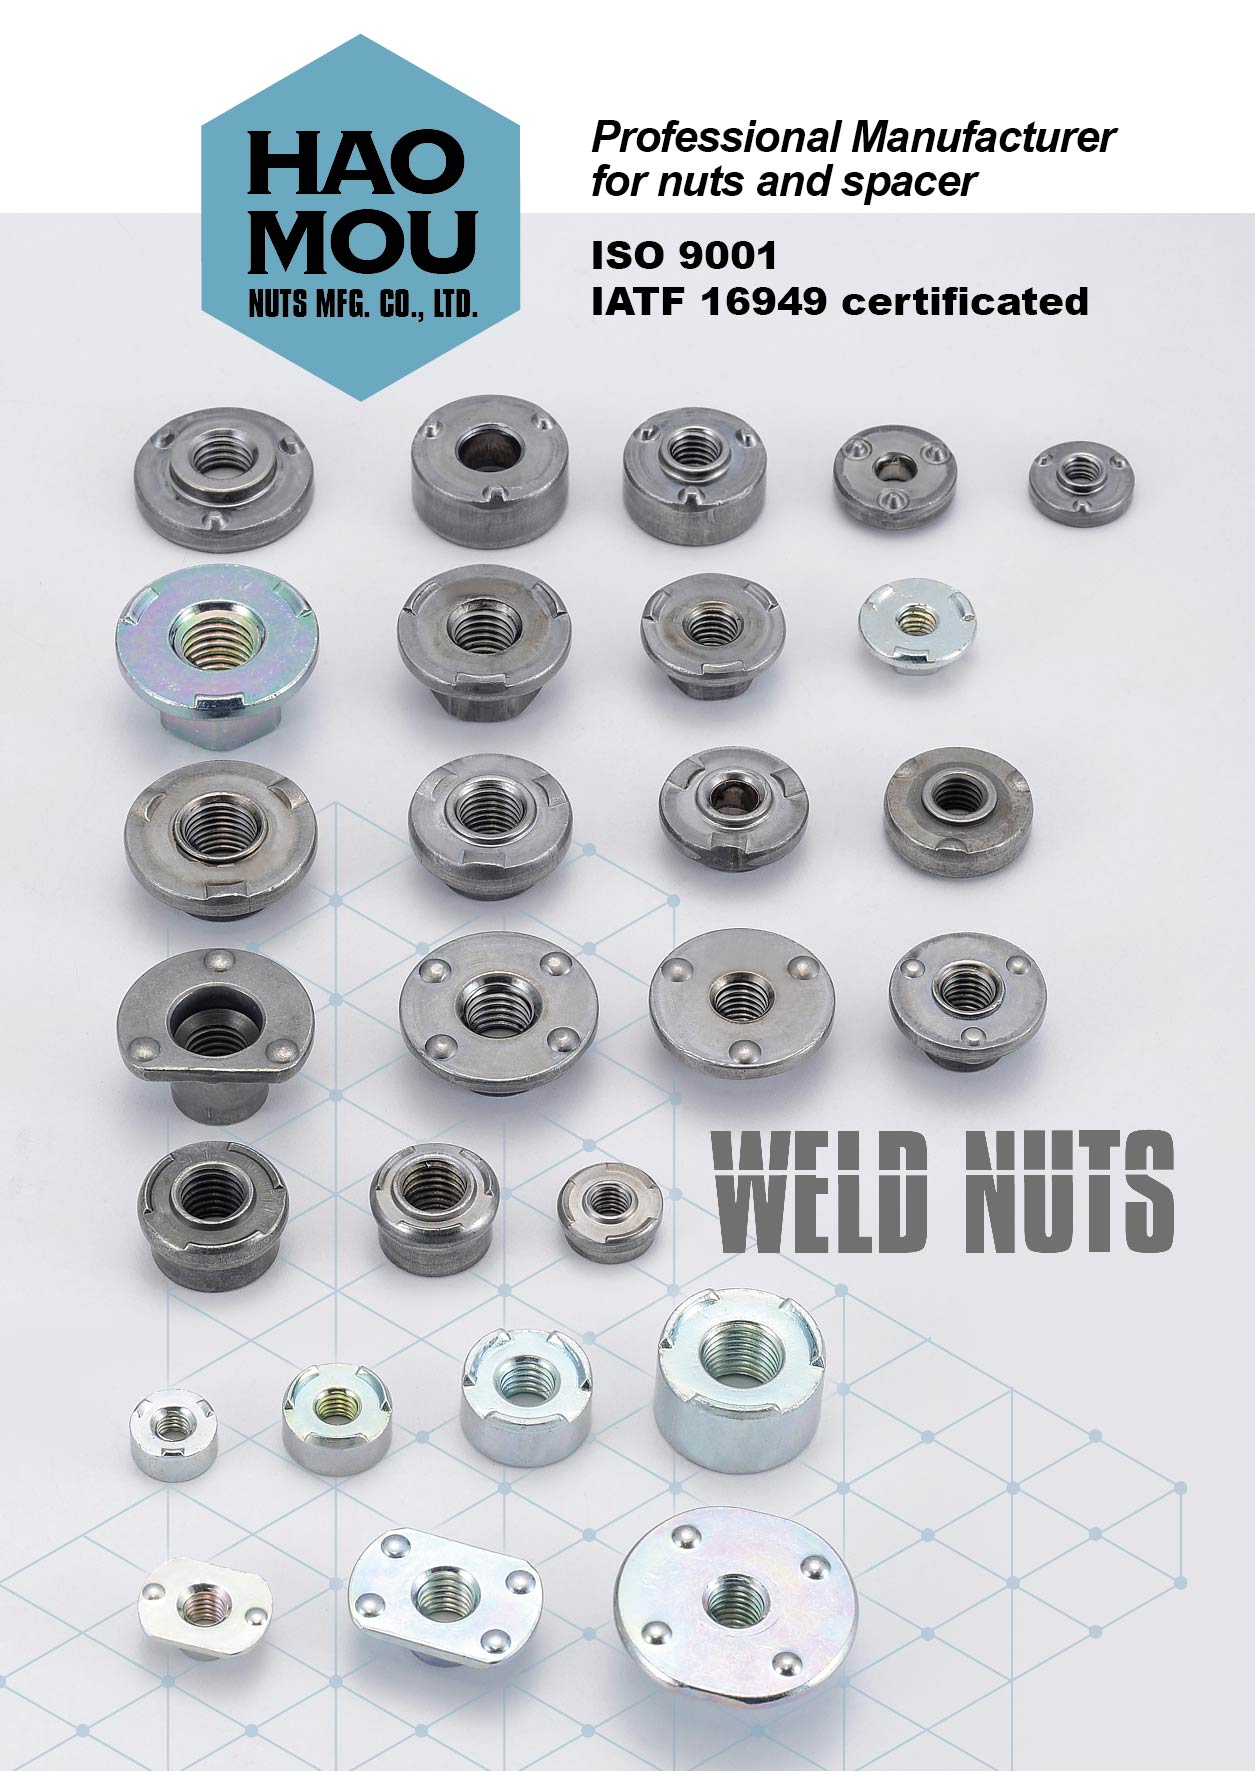 HAO MOU NUTS MFG. CO., LTD._Online Catalogues